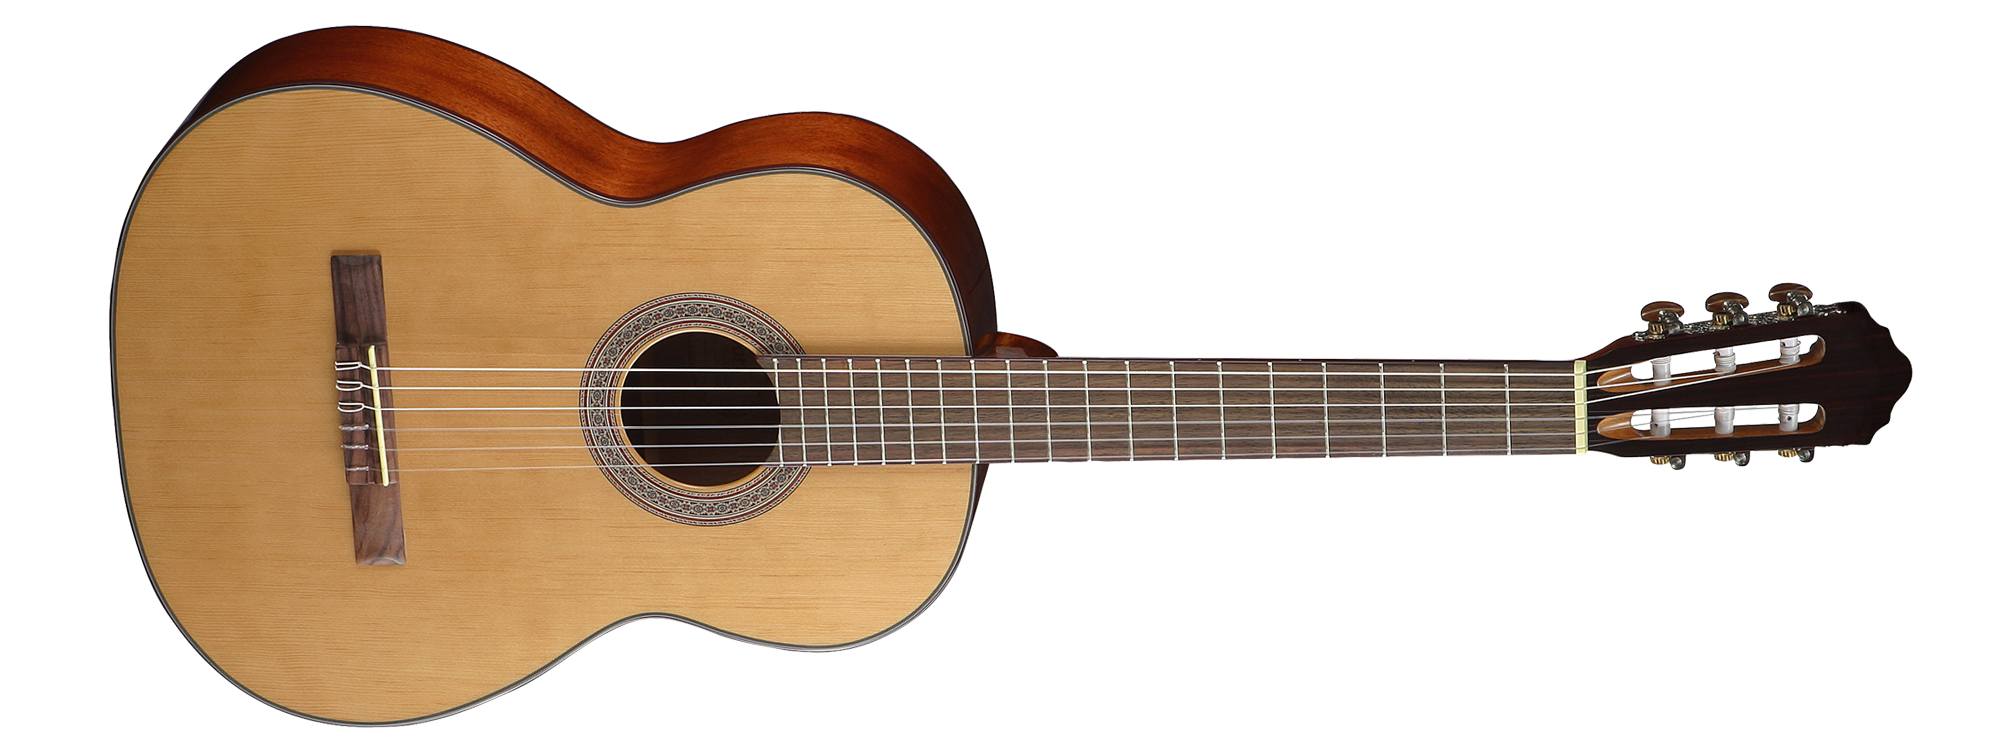 Cort Classical AC200 Open Pore, Acoustic Guitar for sale at Richards Guitars.